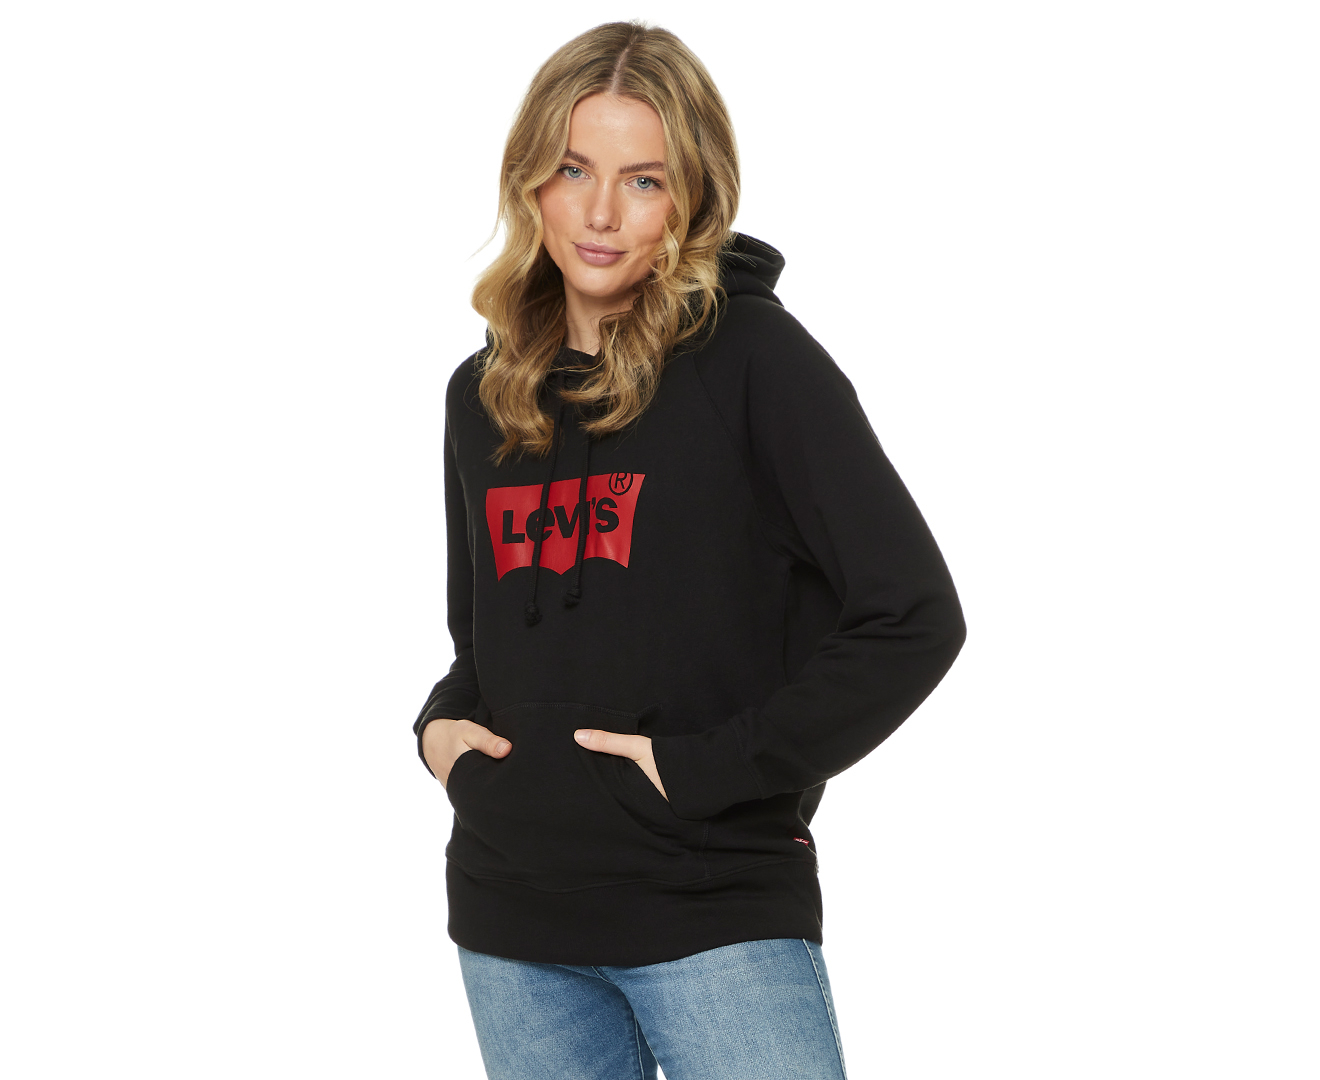 Levi's Women's Graphic Good Sports Hoodie - Black/Red 